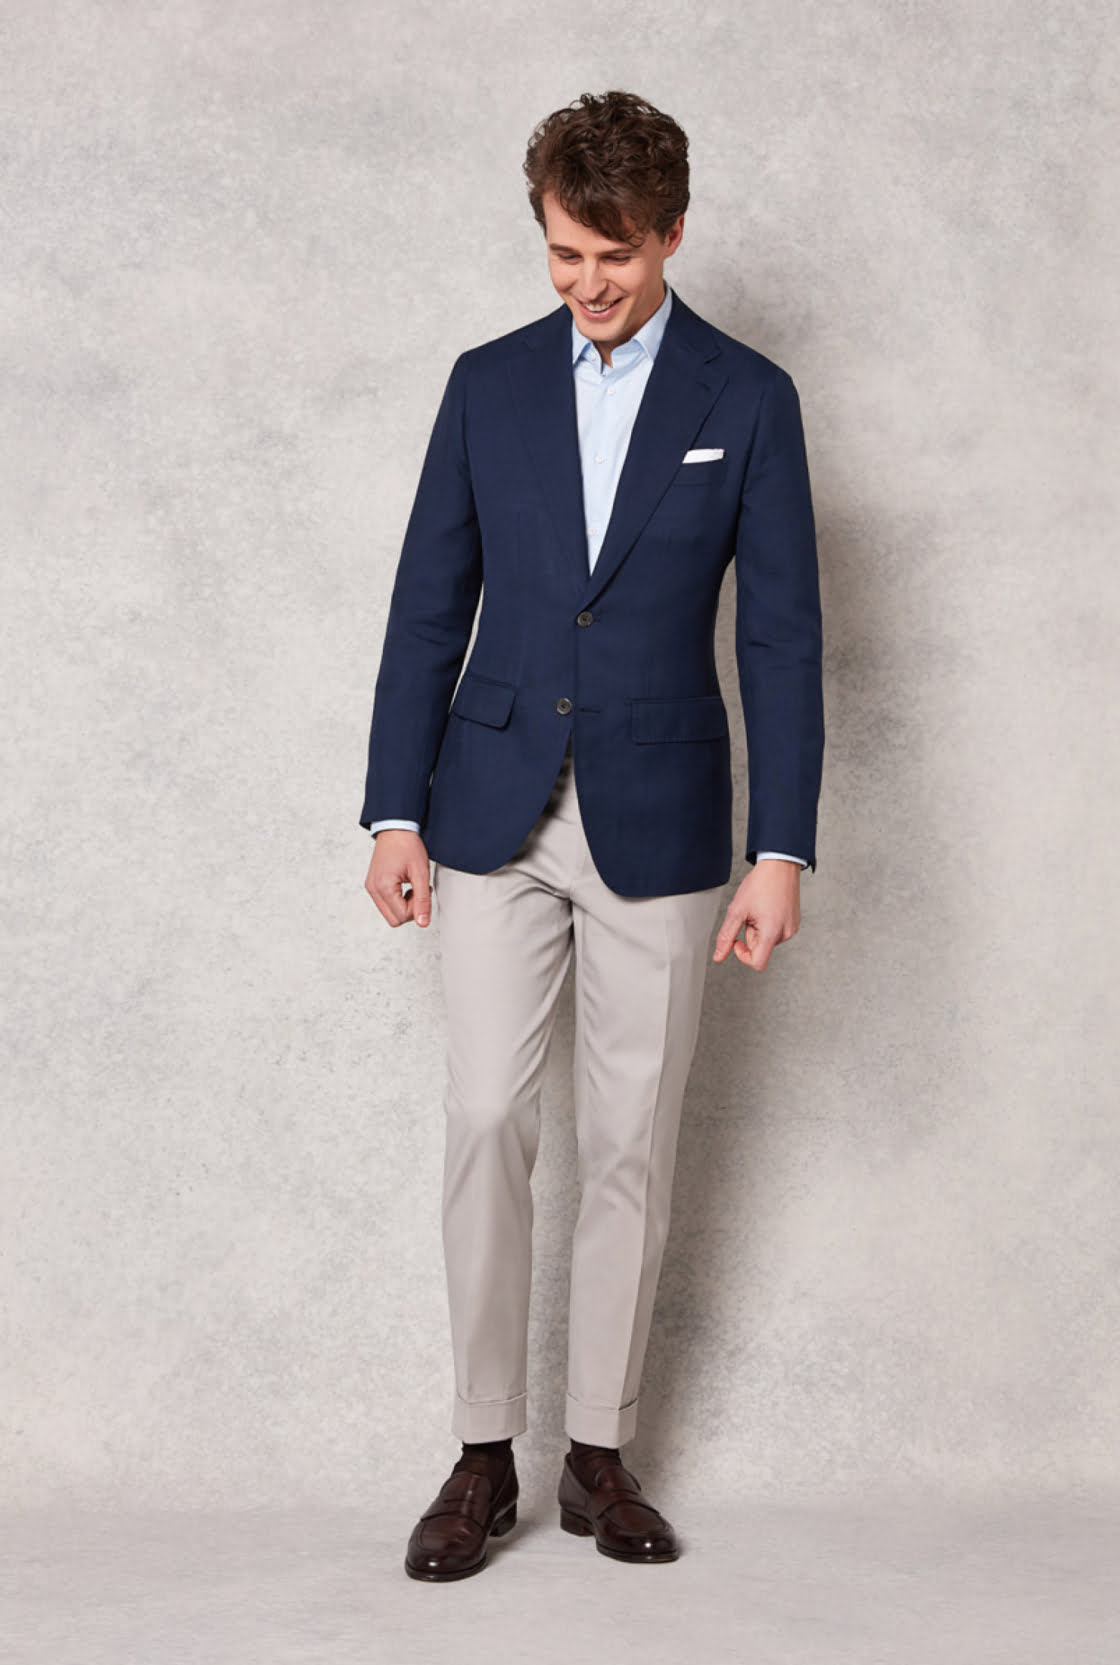 20 PERFECT SUITS & ACCESSORIES FOR THE GROOM – Hello May